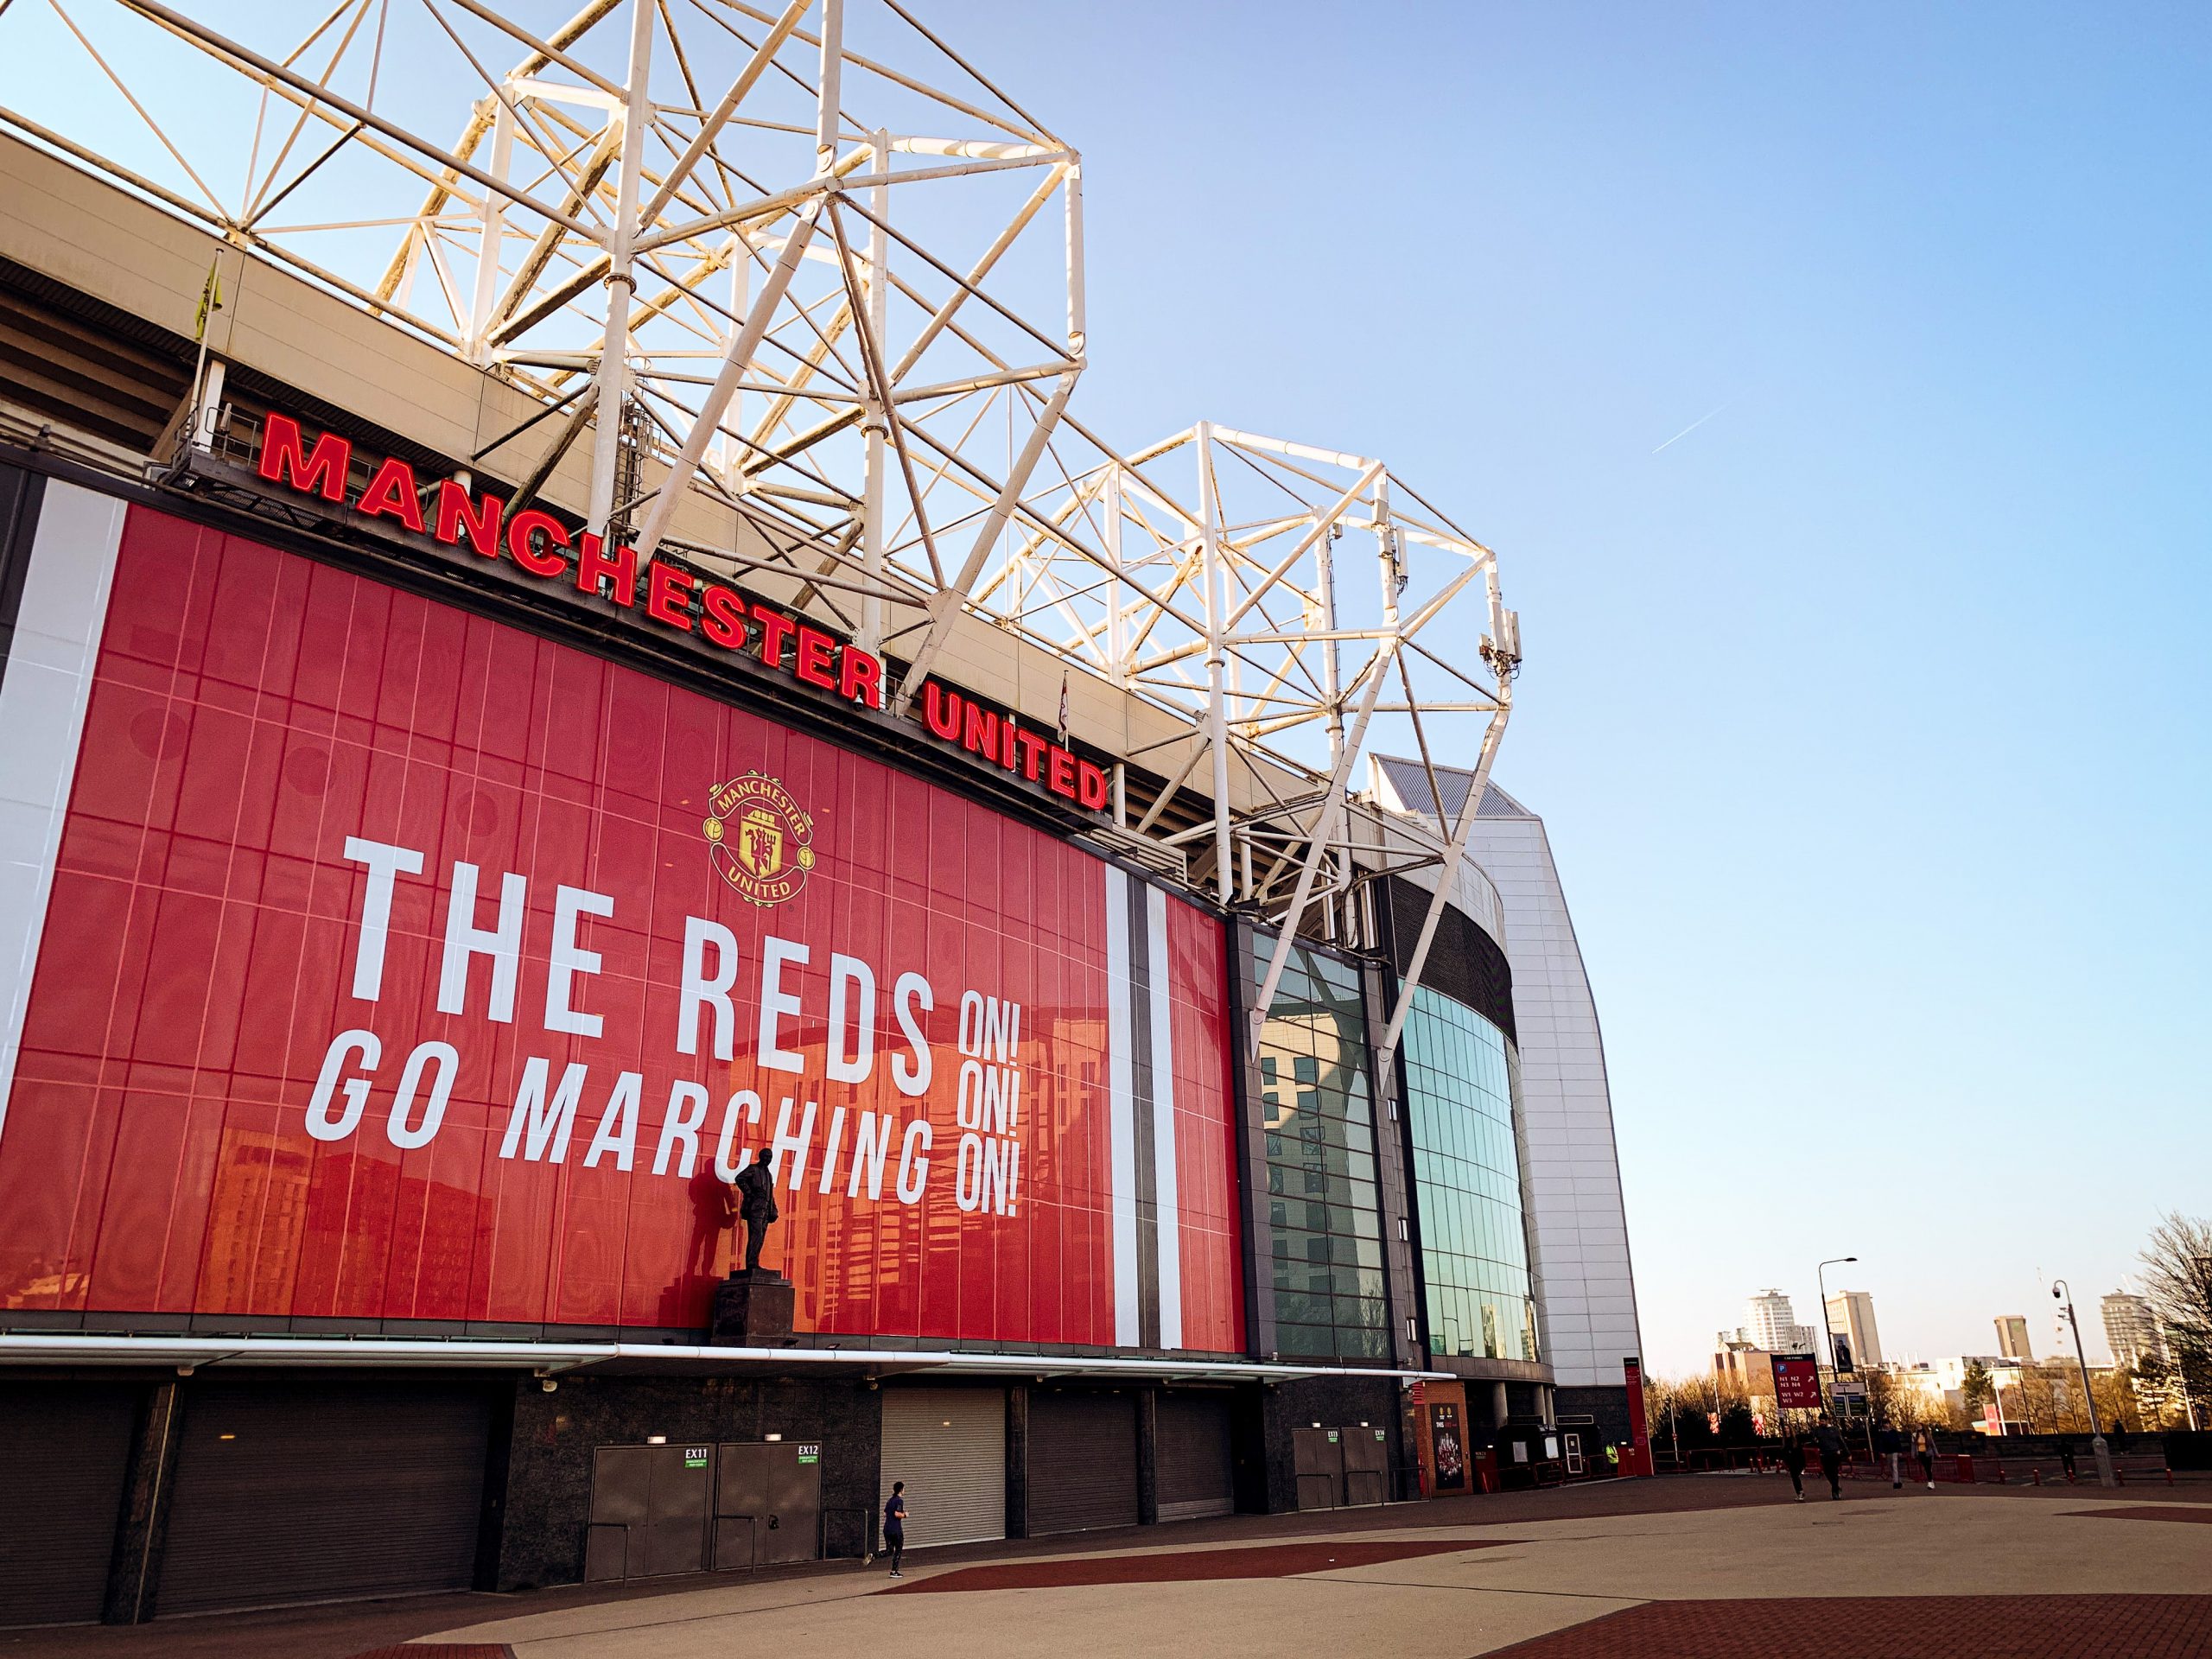 Manchester United home Old Trafford